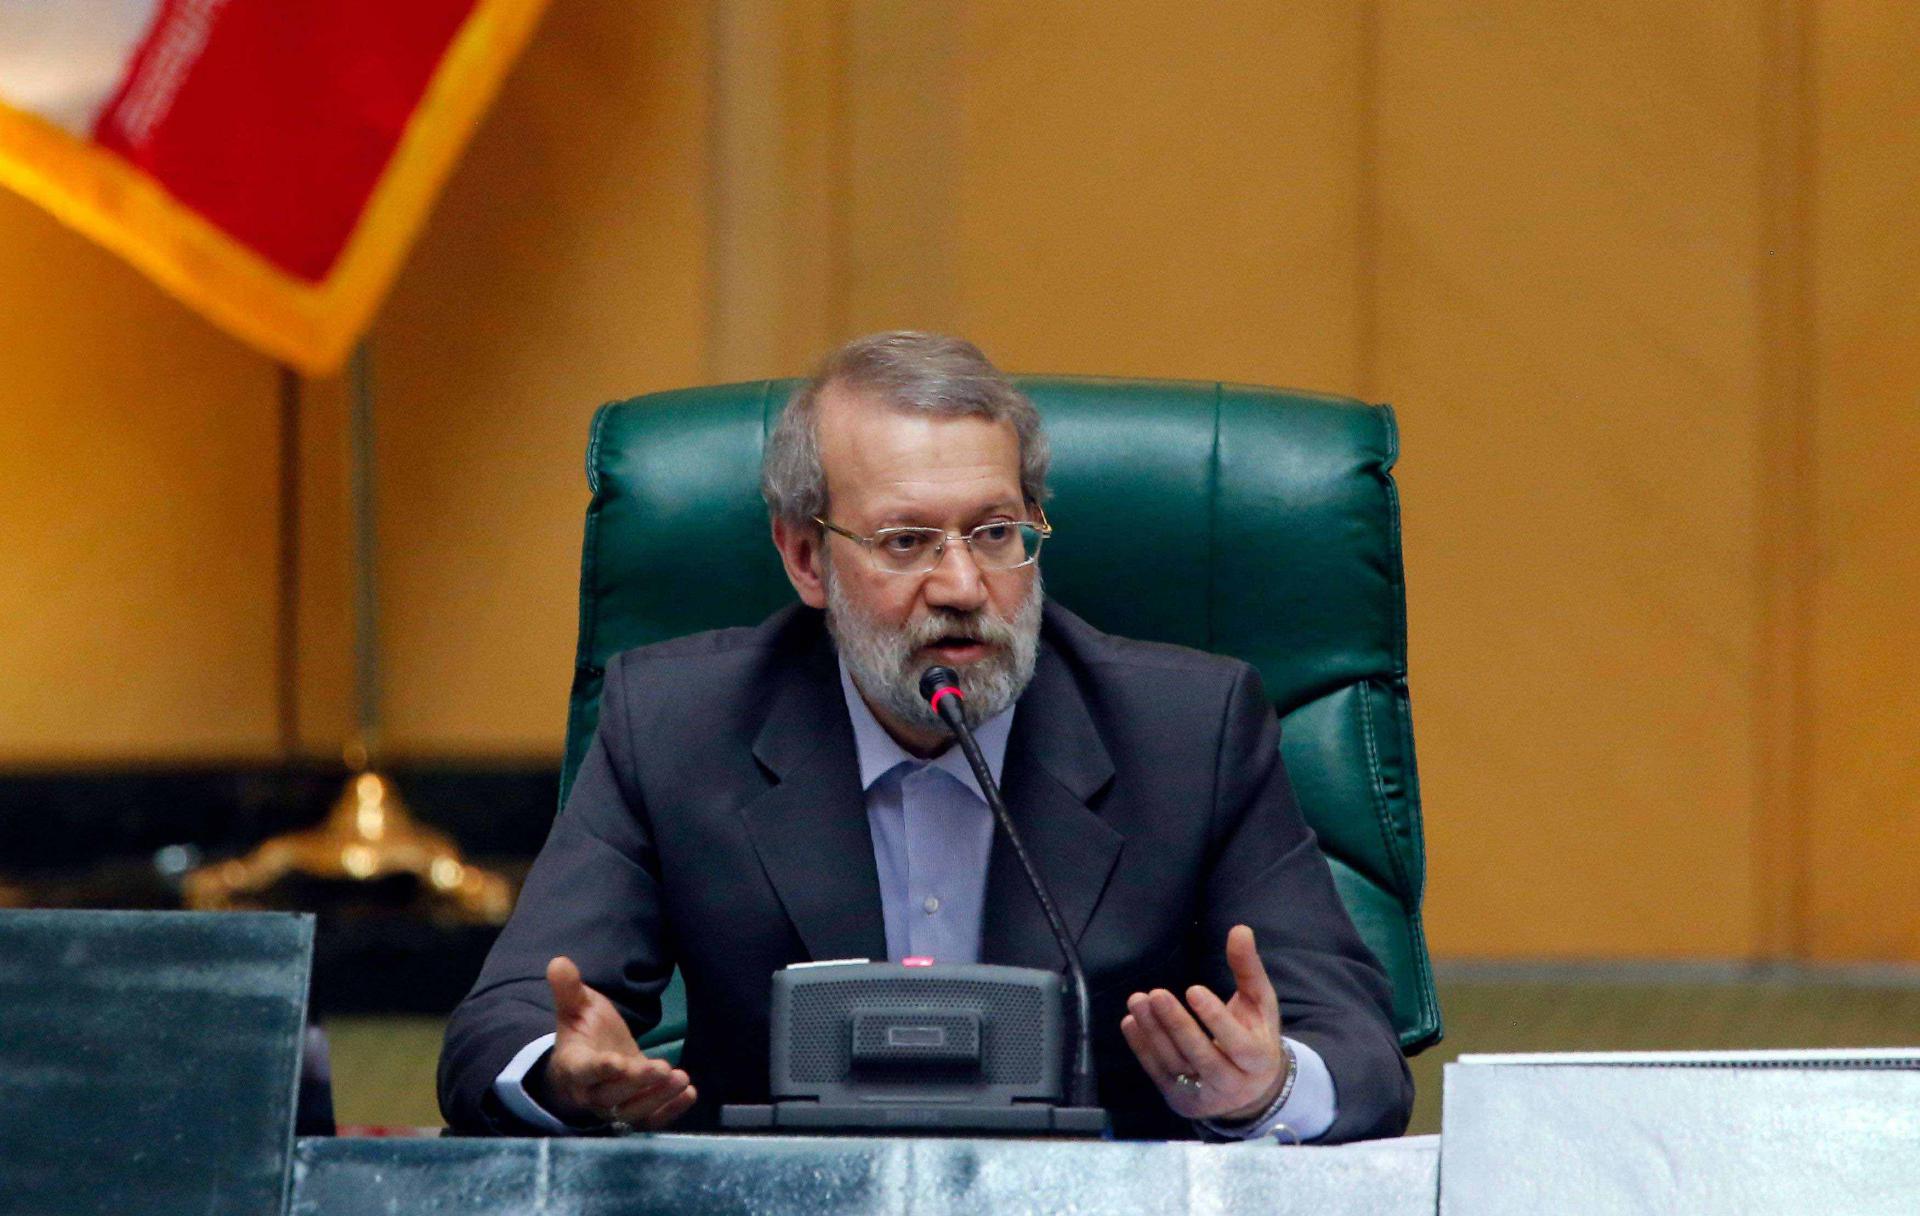 Speaker and veteran politician Ali Larijani was absent after testing positive for COVID-19 =